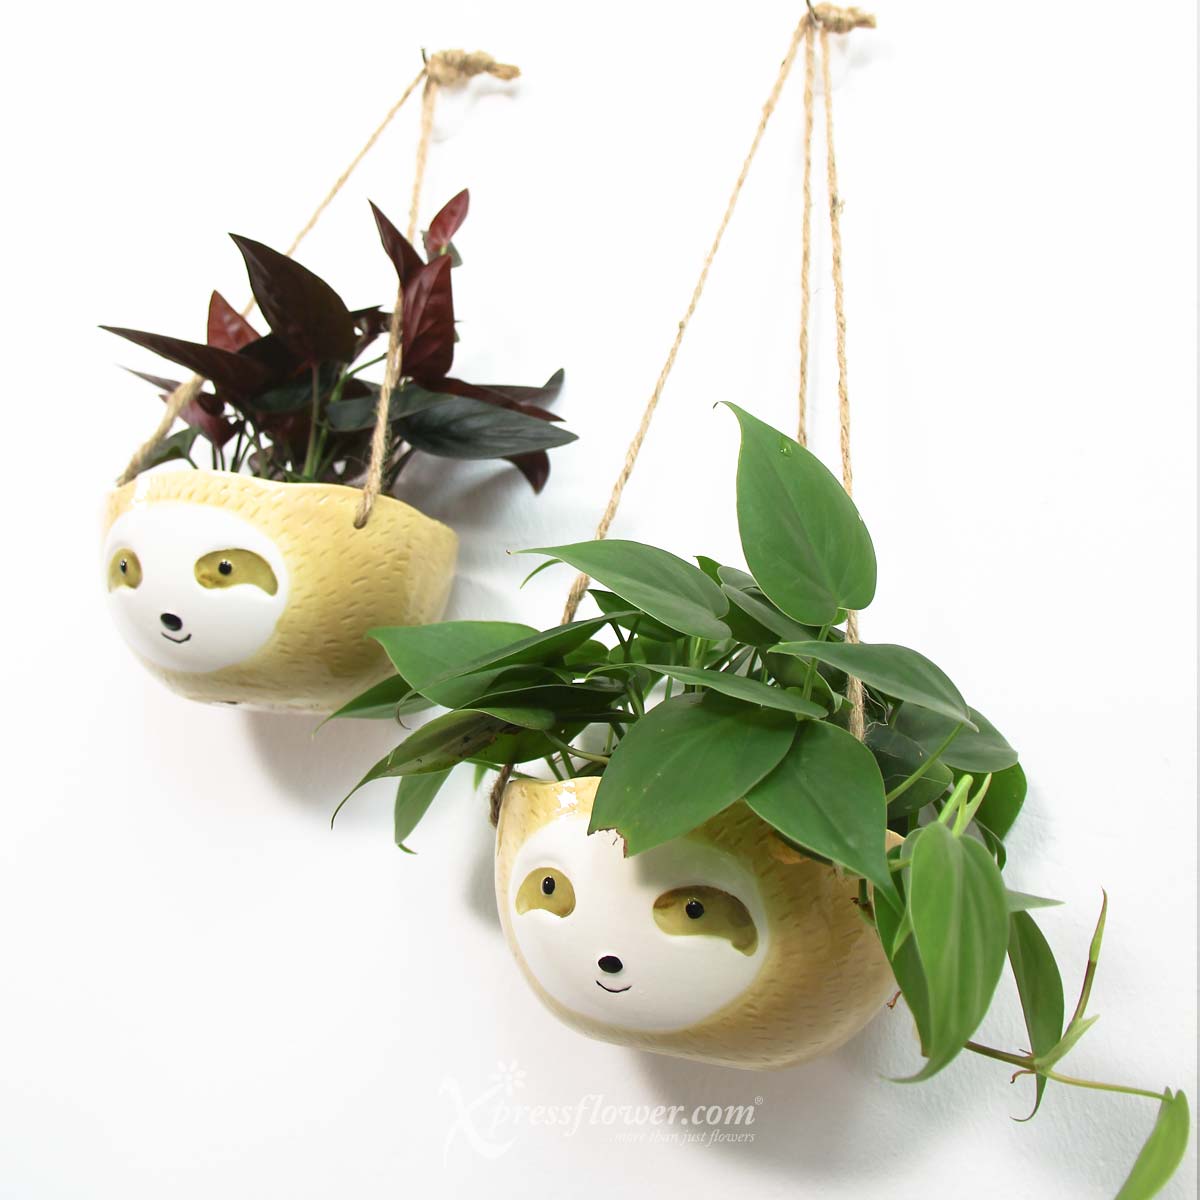 PS2118 Mr Cool Sloth (Philodendron Scandens Plant) 3a